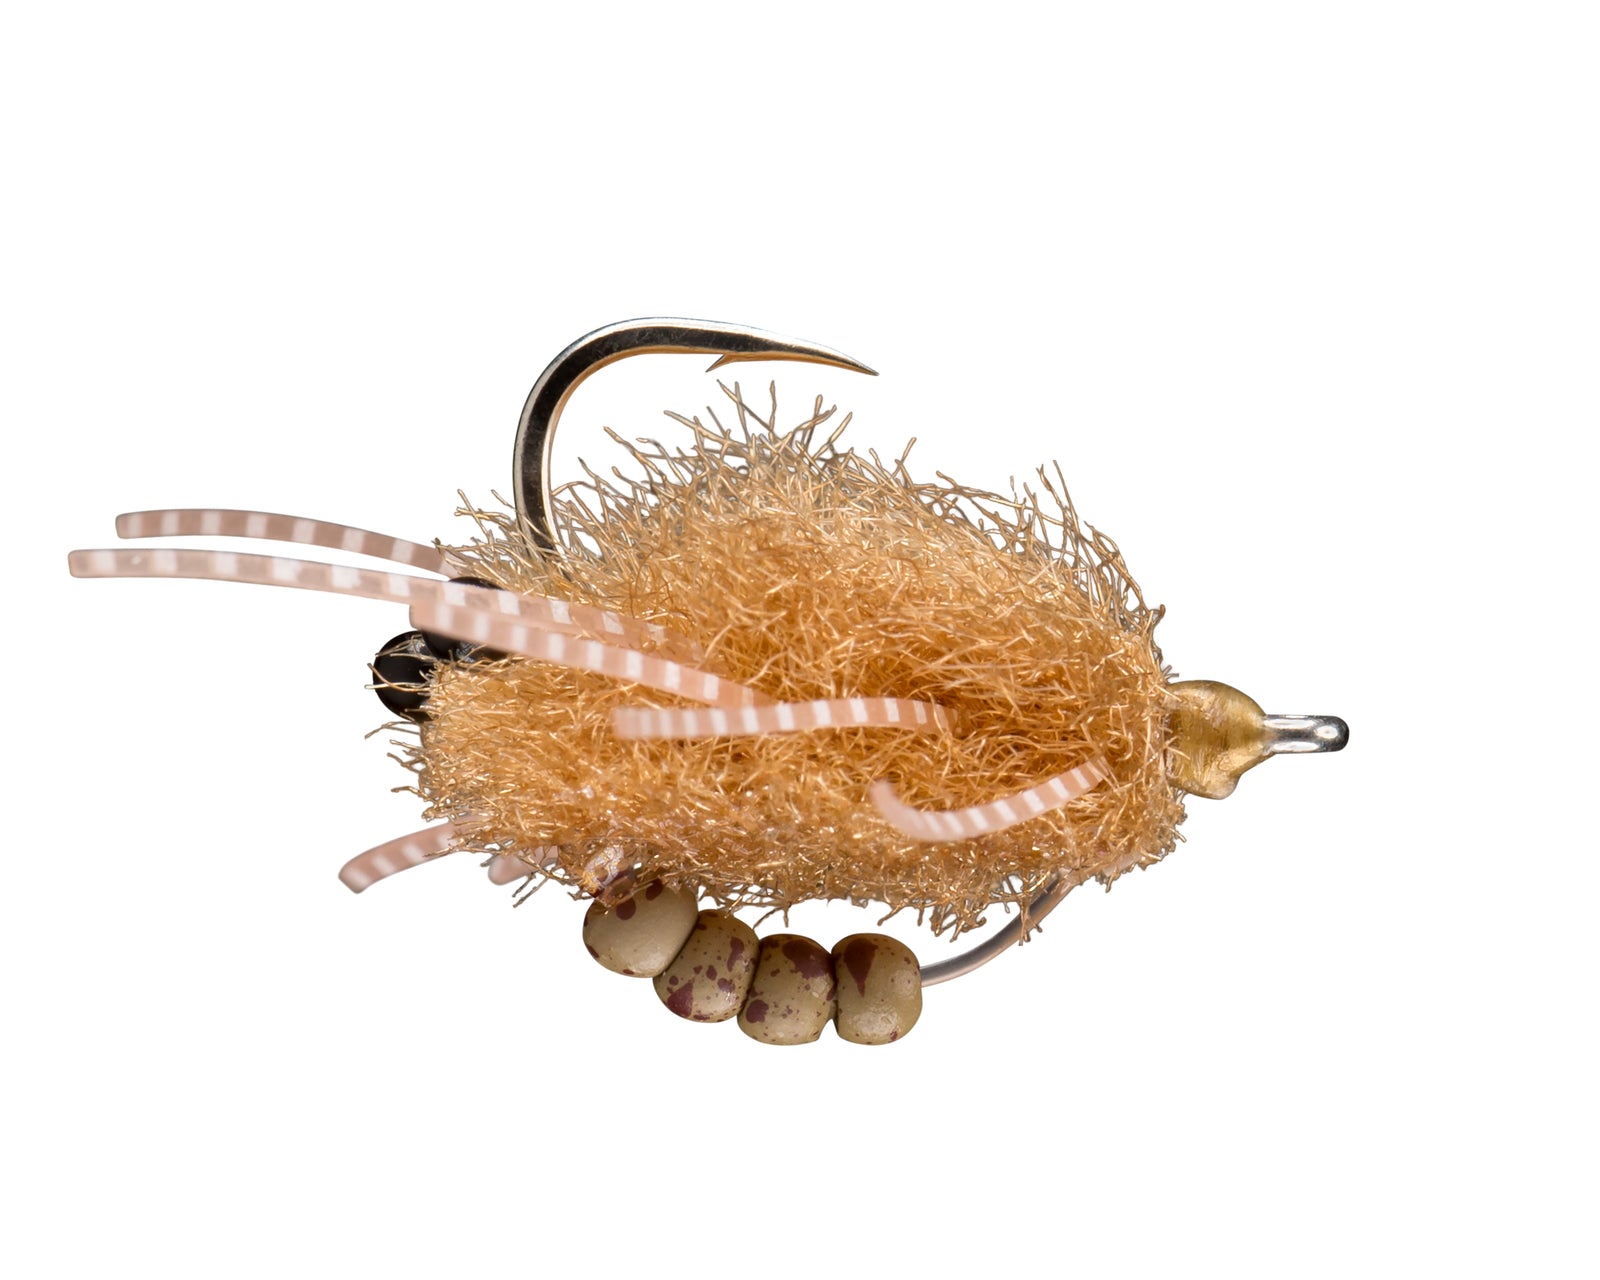 RIO's Tactical Crab #2 in Tan - NEW!